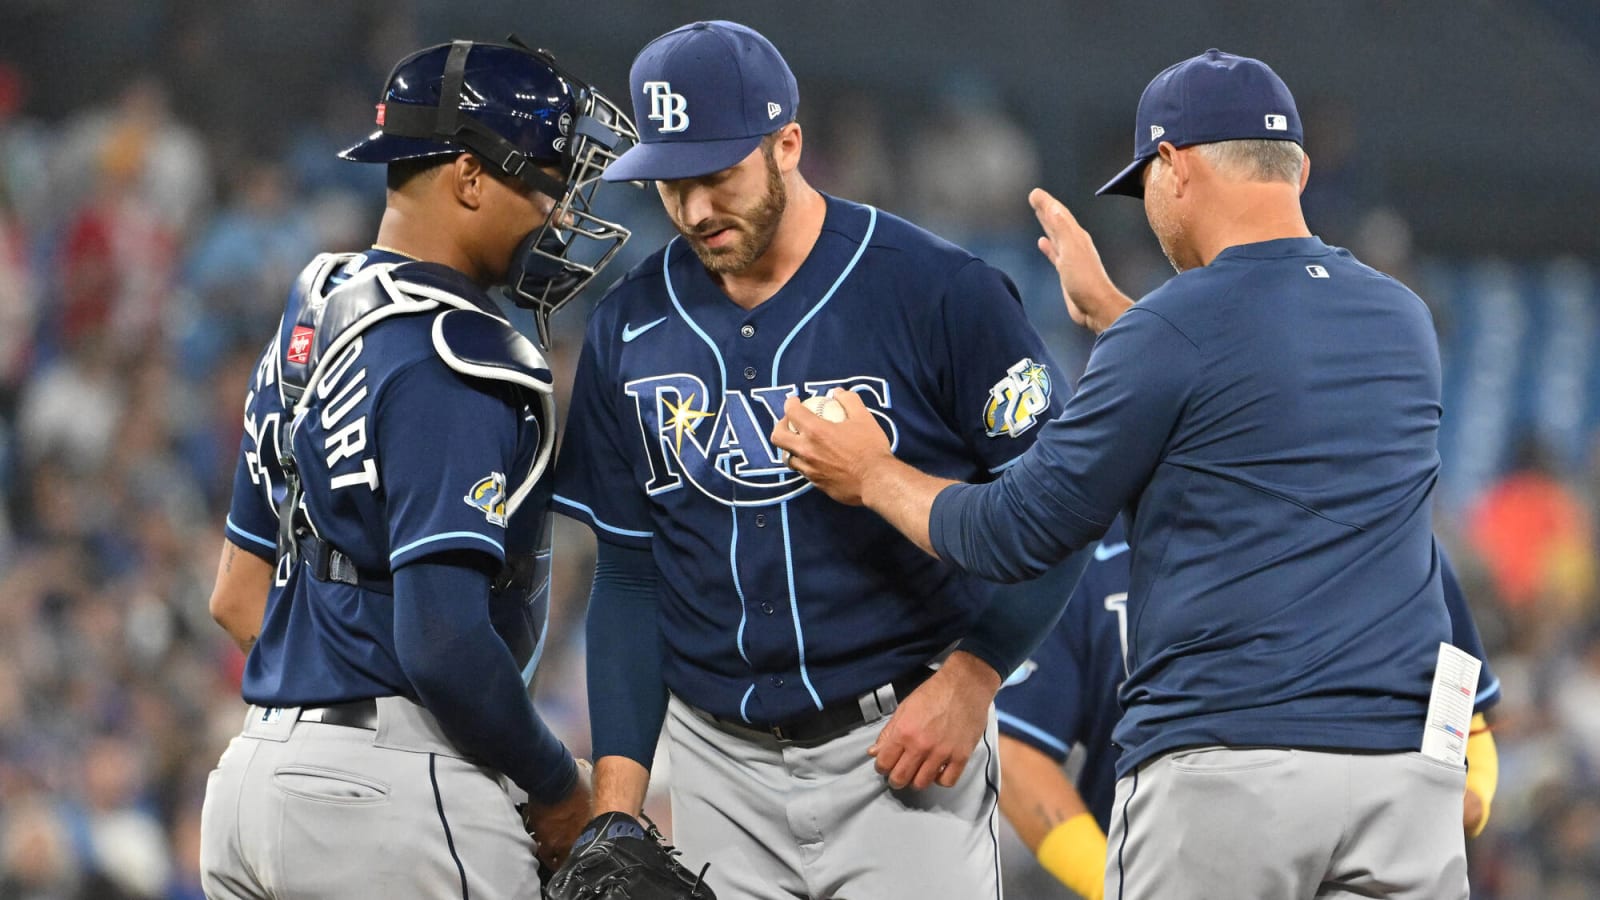 Rays respond to losing first game of season